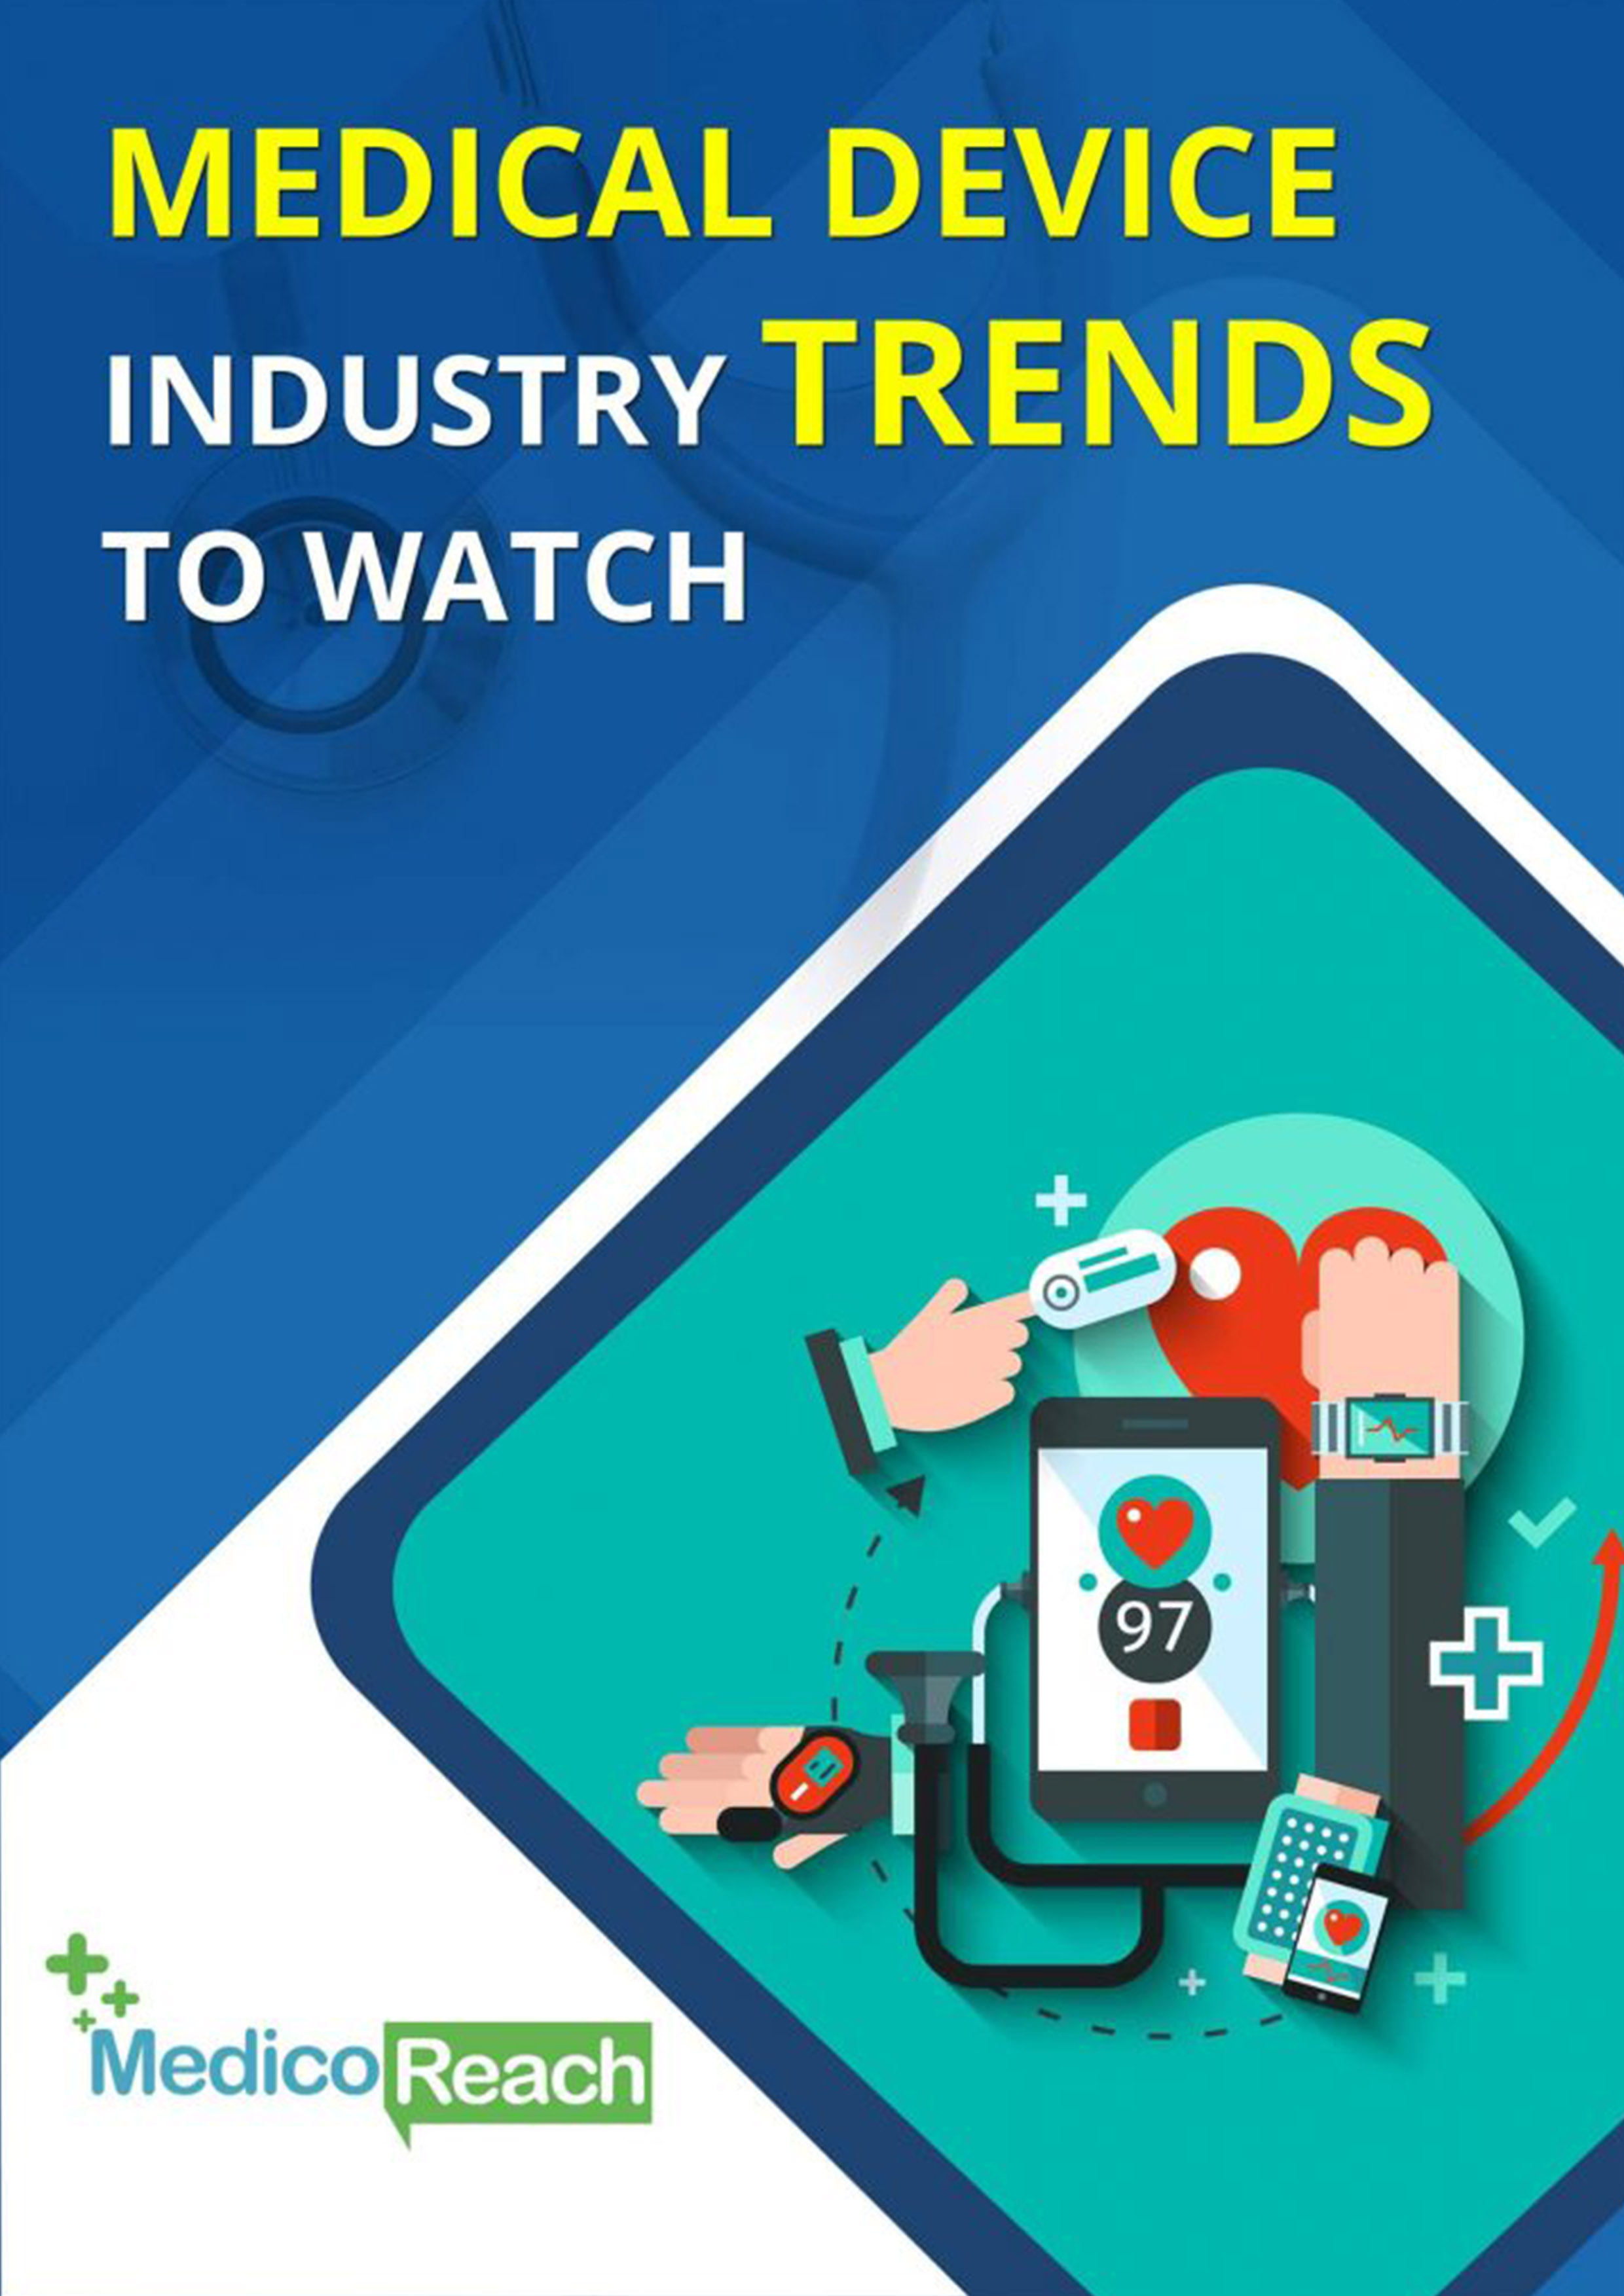 Medical Device Industry to Watch